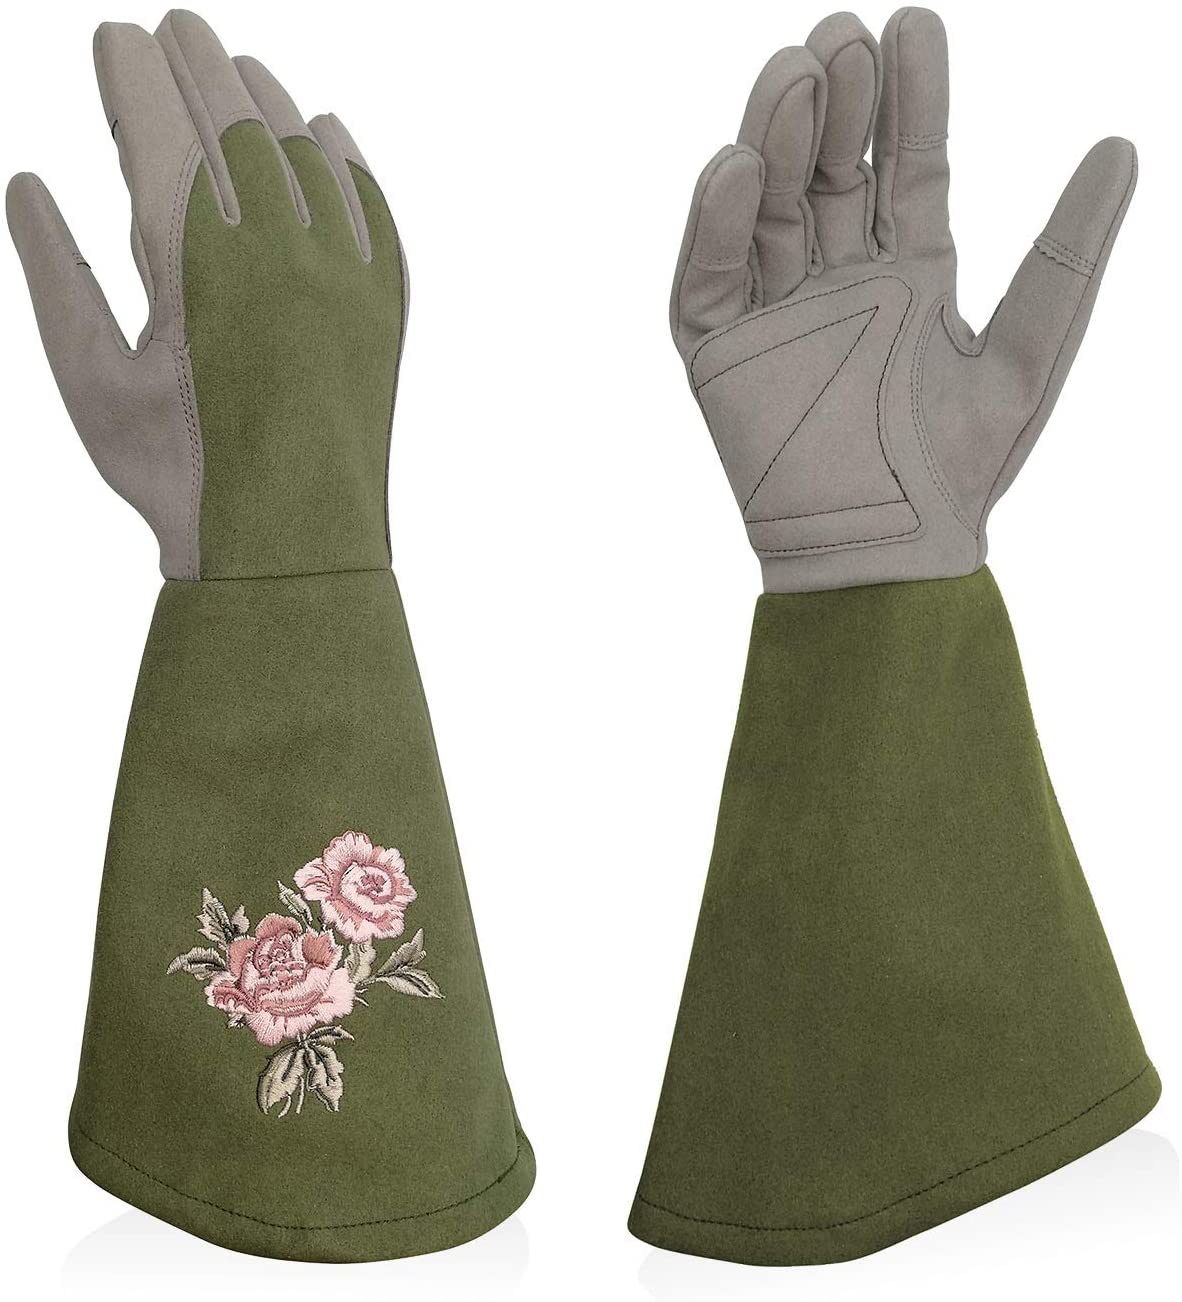 Intra-FIT Rose Embroidery Pruning Gloves Gardening Gloves with Extra Long Forearm Protection for Women and Men Purple Magenta Blue Olivegreen Lightblue Softpink Blushpink